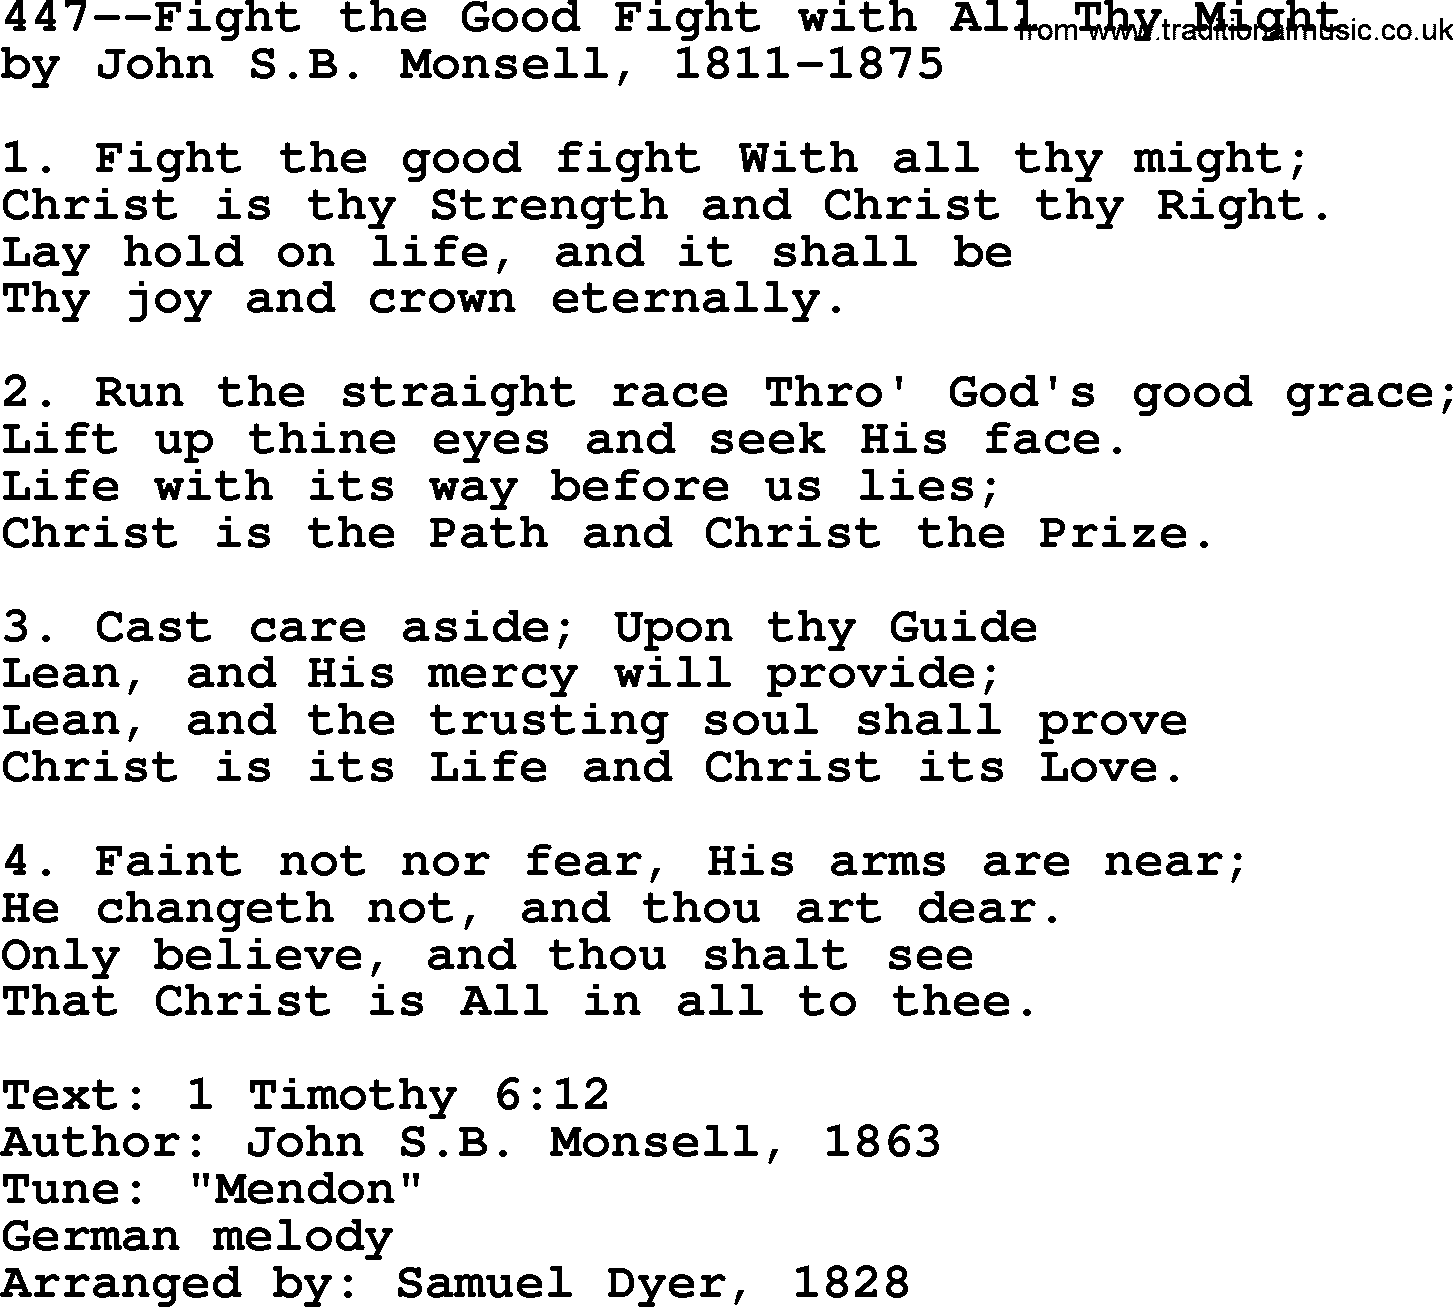 Lutheran Hymn: 447--Fight the Good Fight with All Thy Might.txt lyrics with PDF